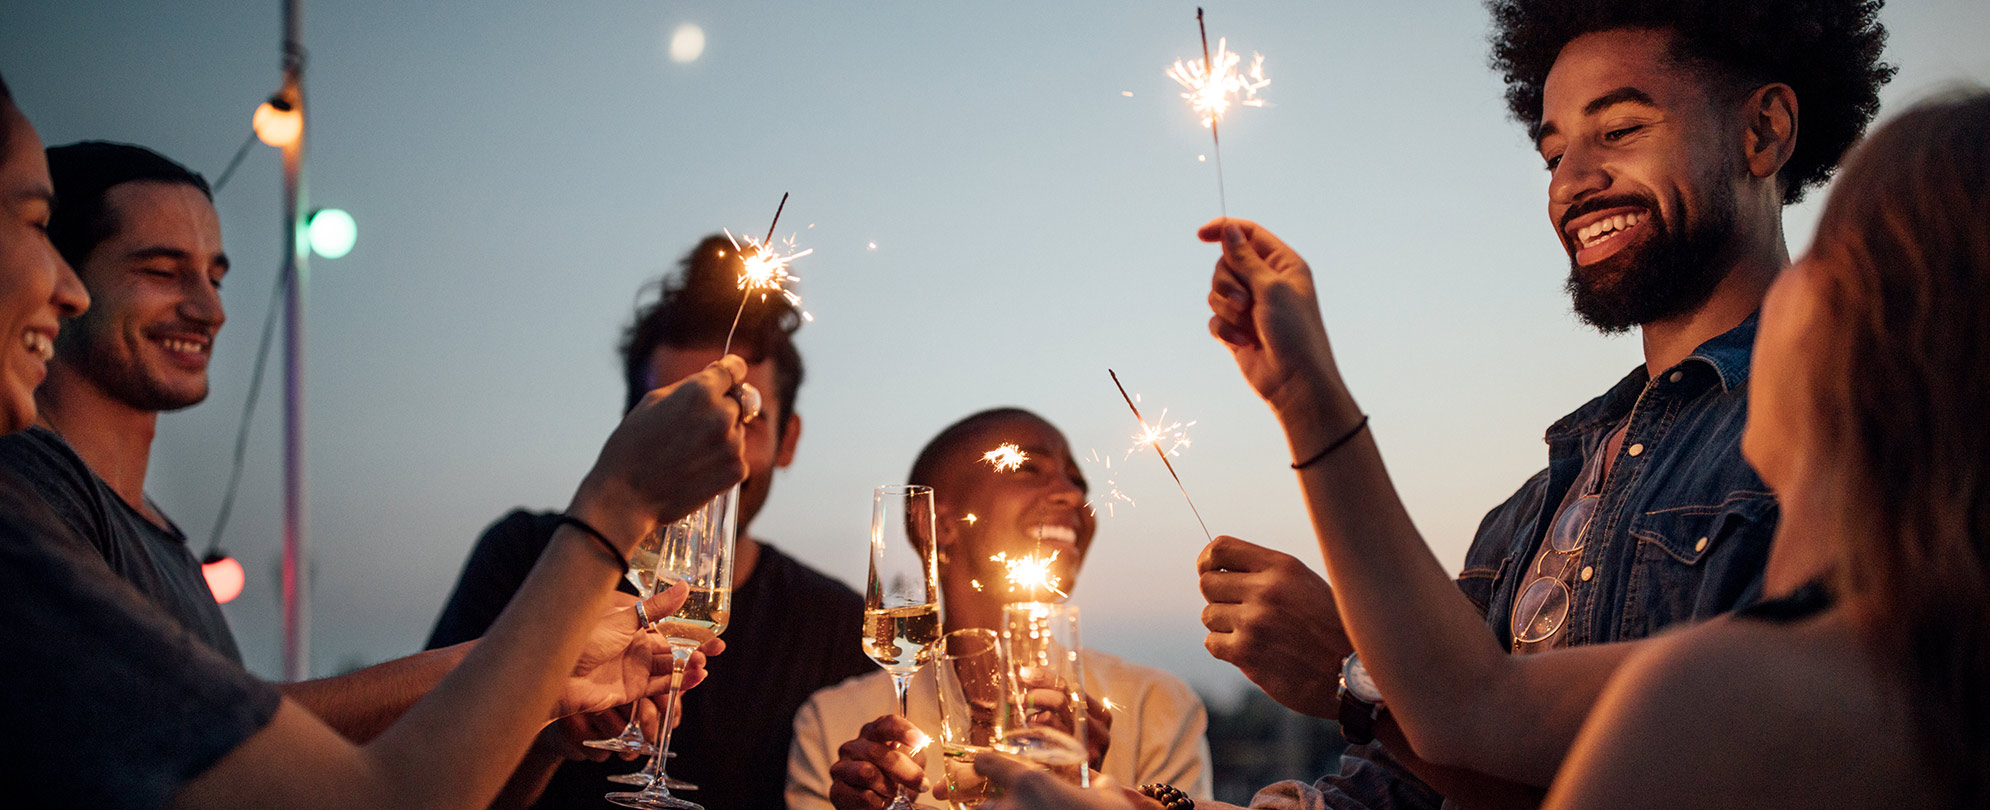 A group of friends stand together as they toast glasses of champagne and raise sparklers in celebration.